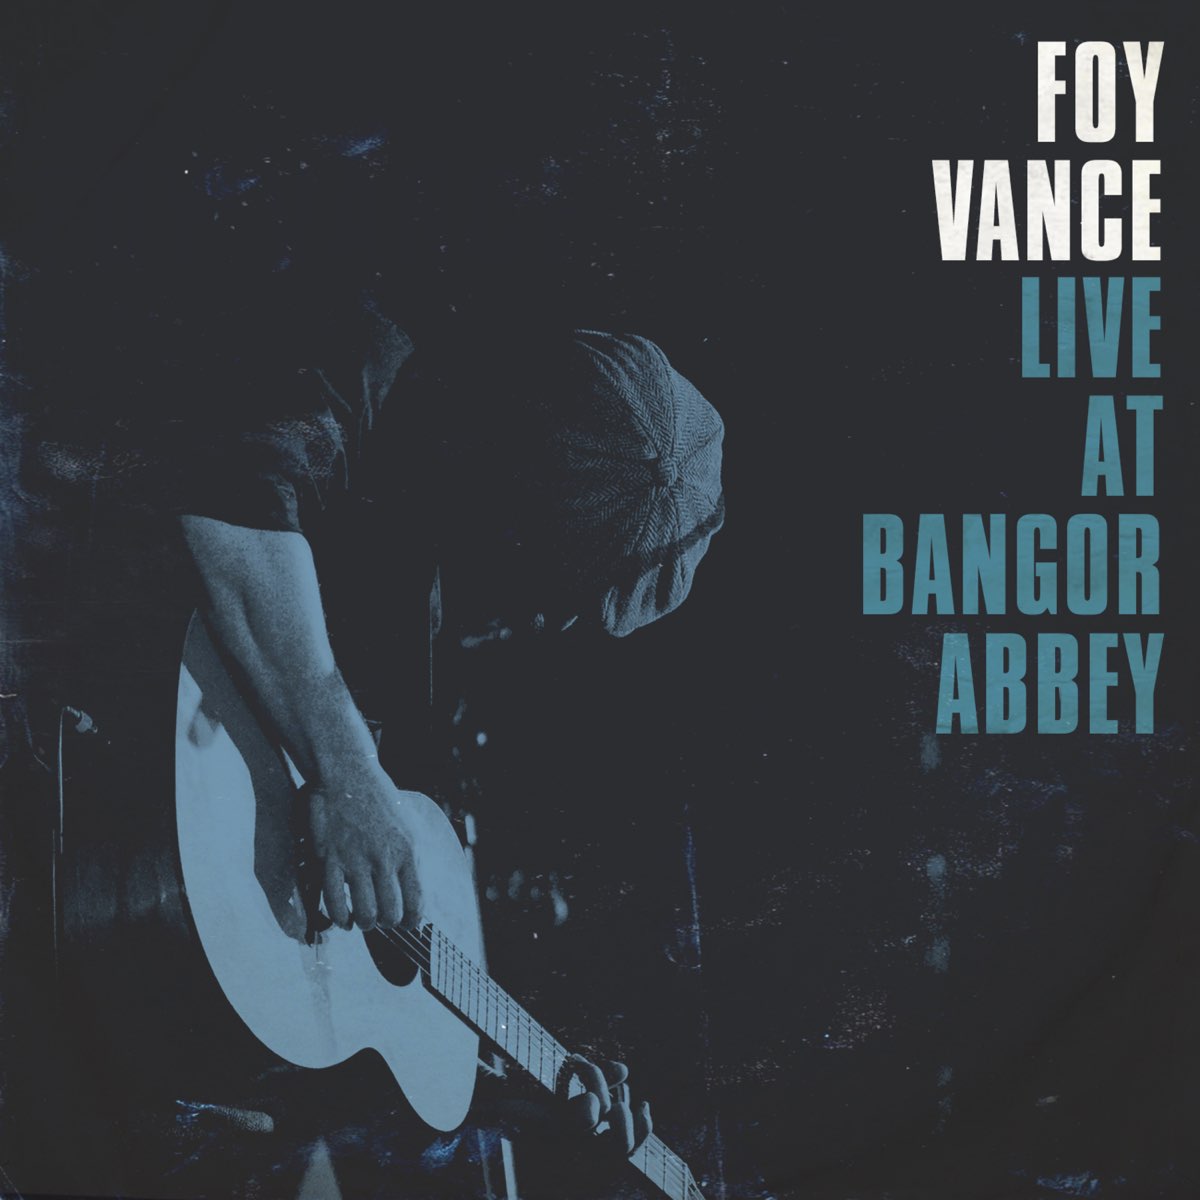 ‎Live at Bangor Abbey by Foy Vance on Apple Music